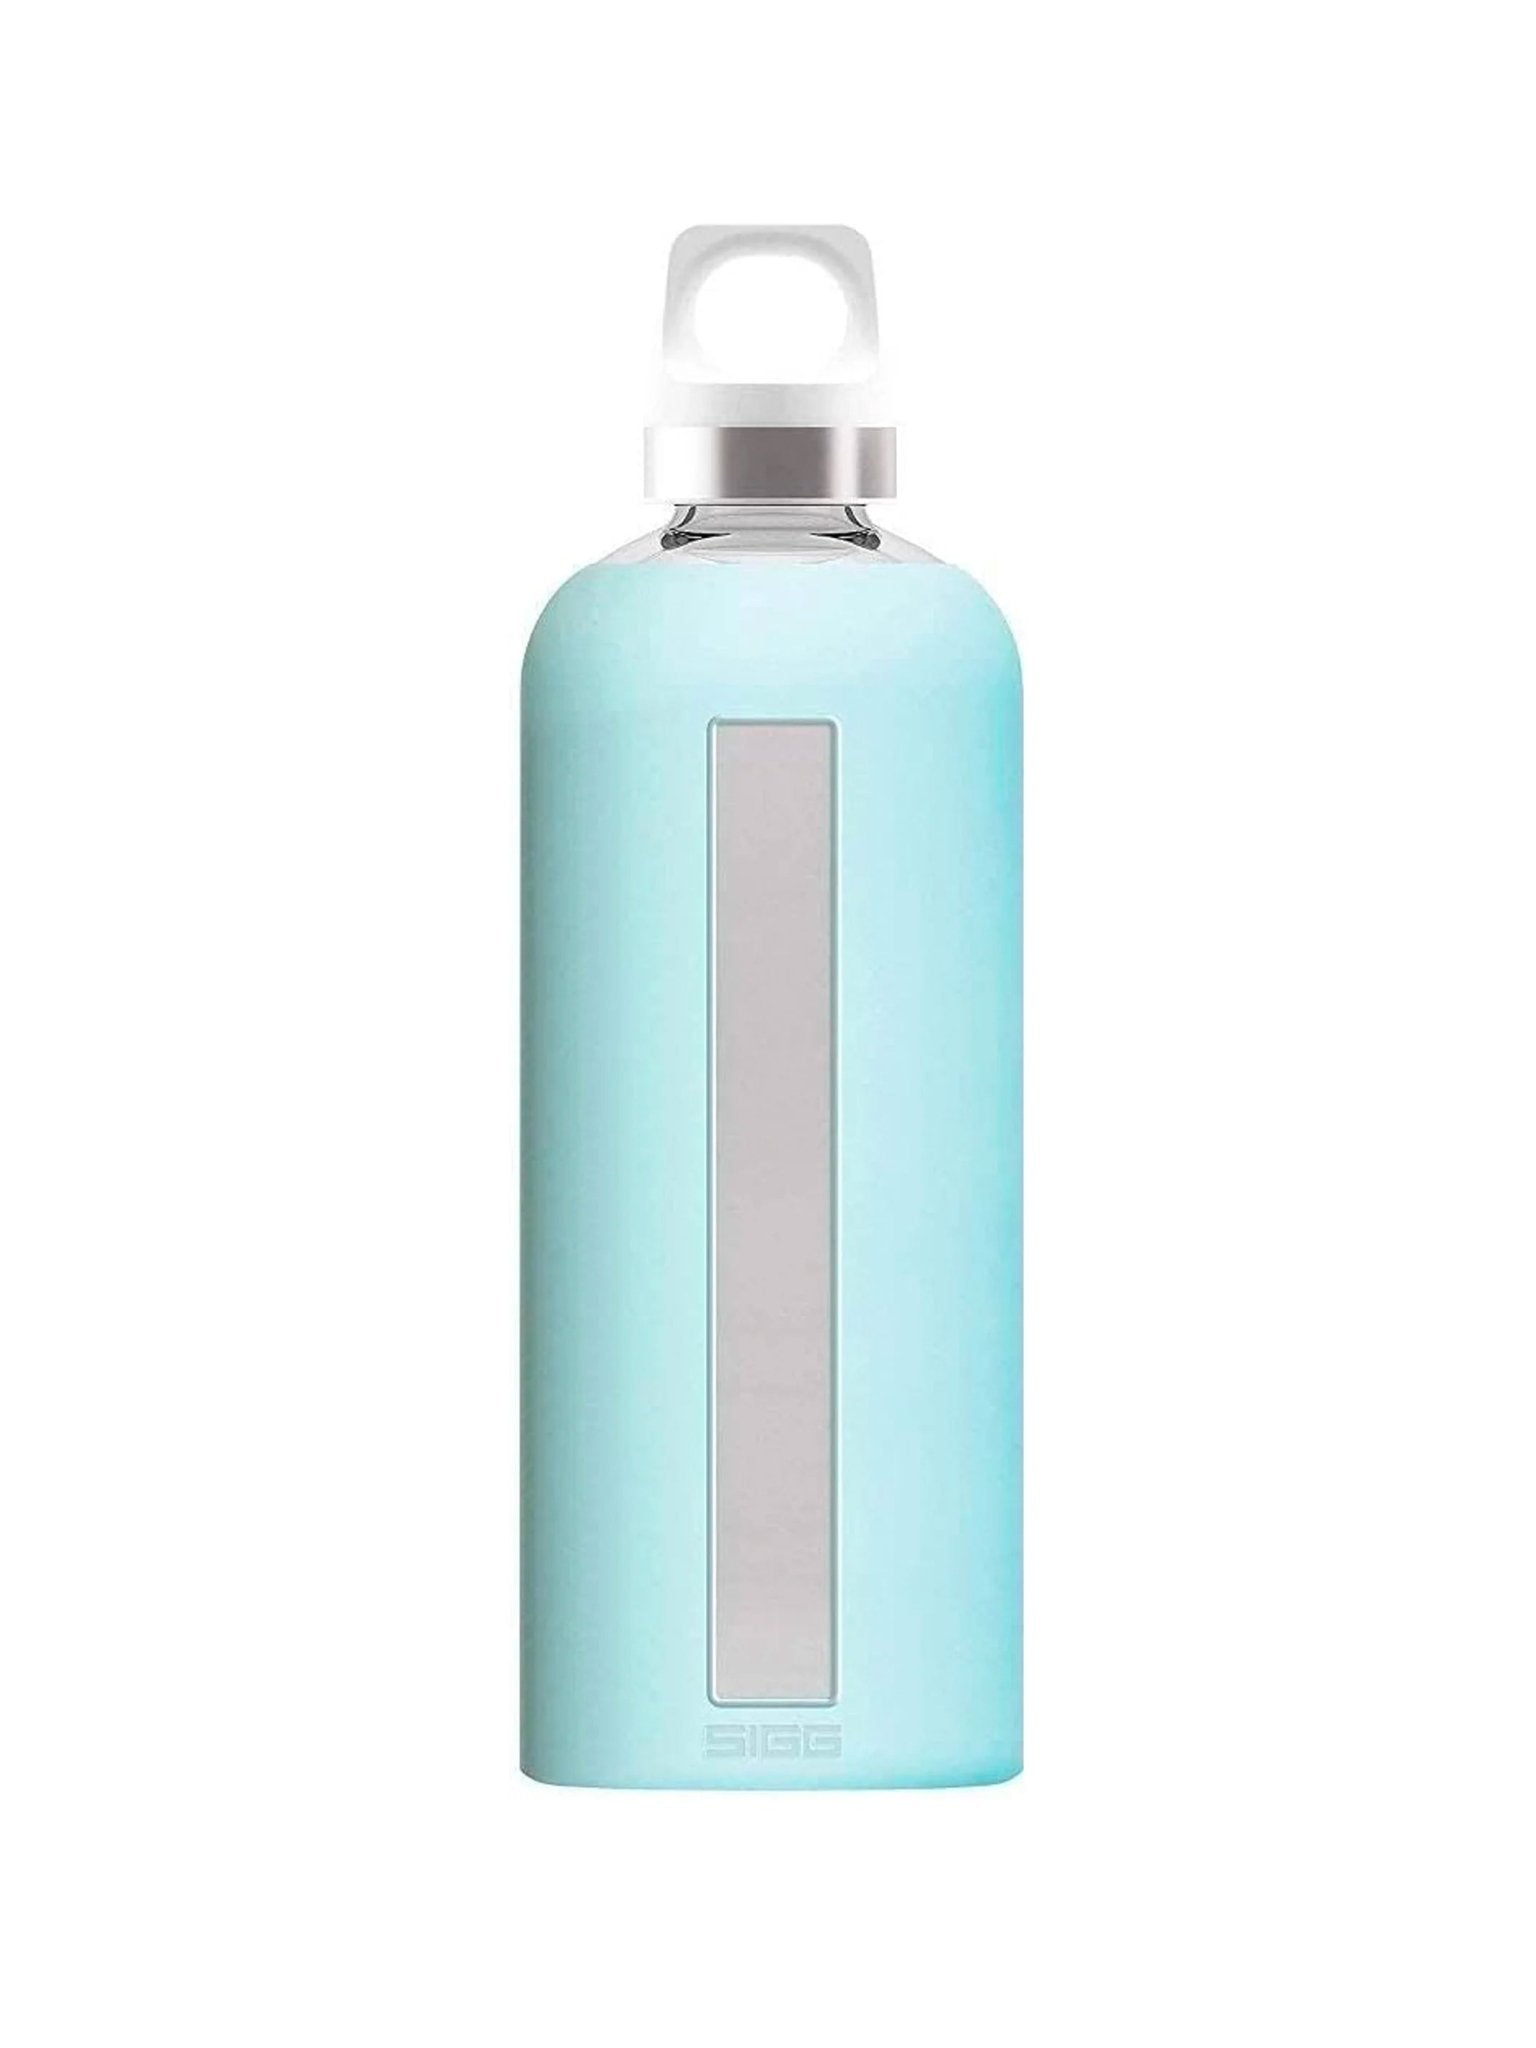 4elementsclothingSiggSIGG - Star Water Bottle, Leak-Proof Glass Bottle, Heat-Resistant with Silicone CaseWater Bottles8649.40